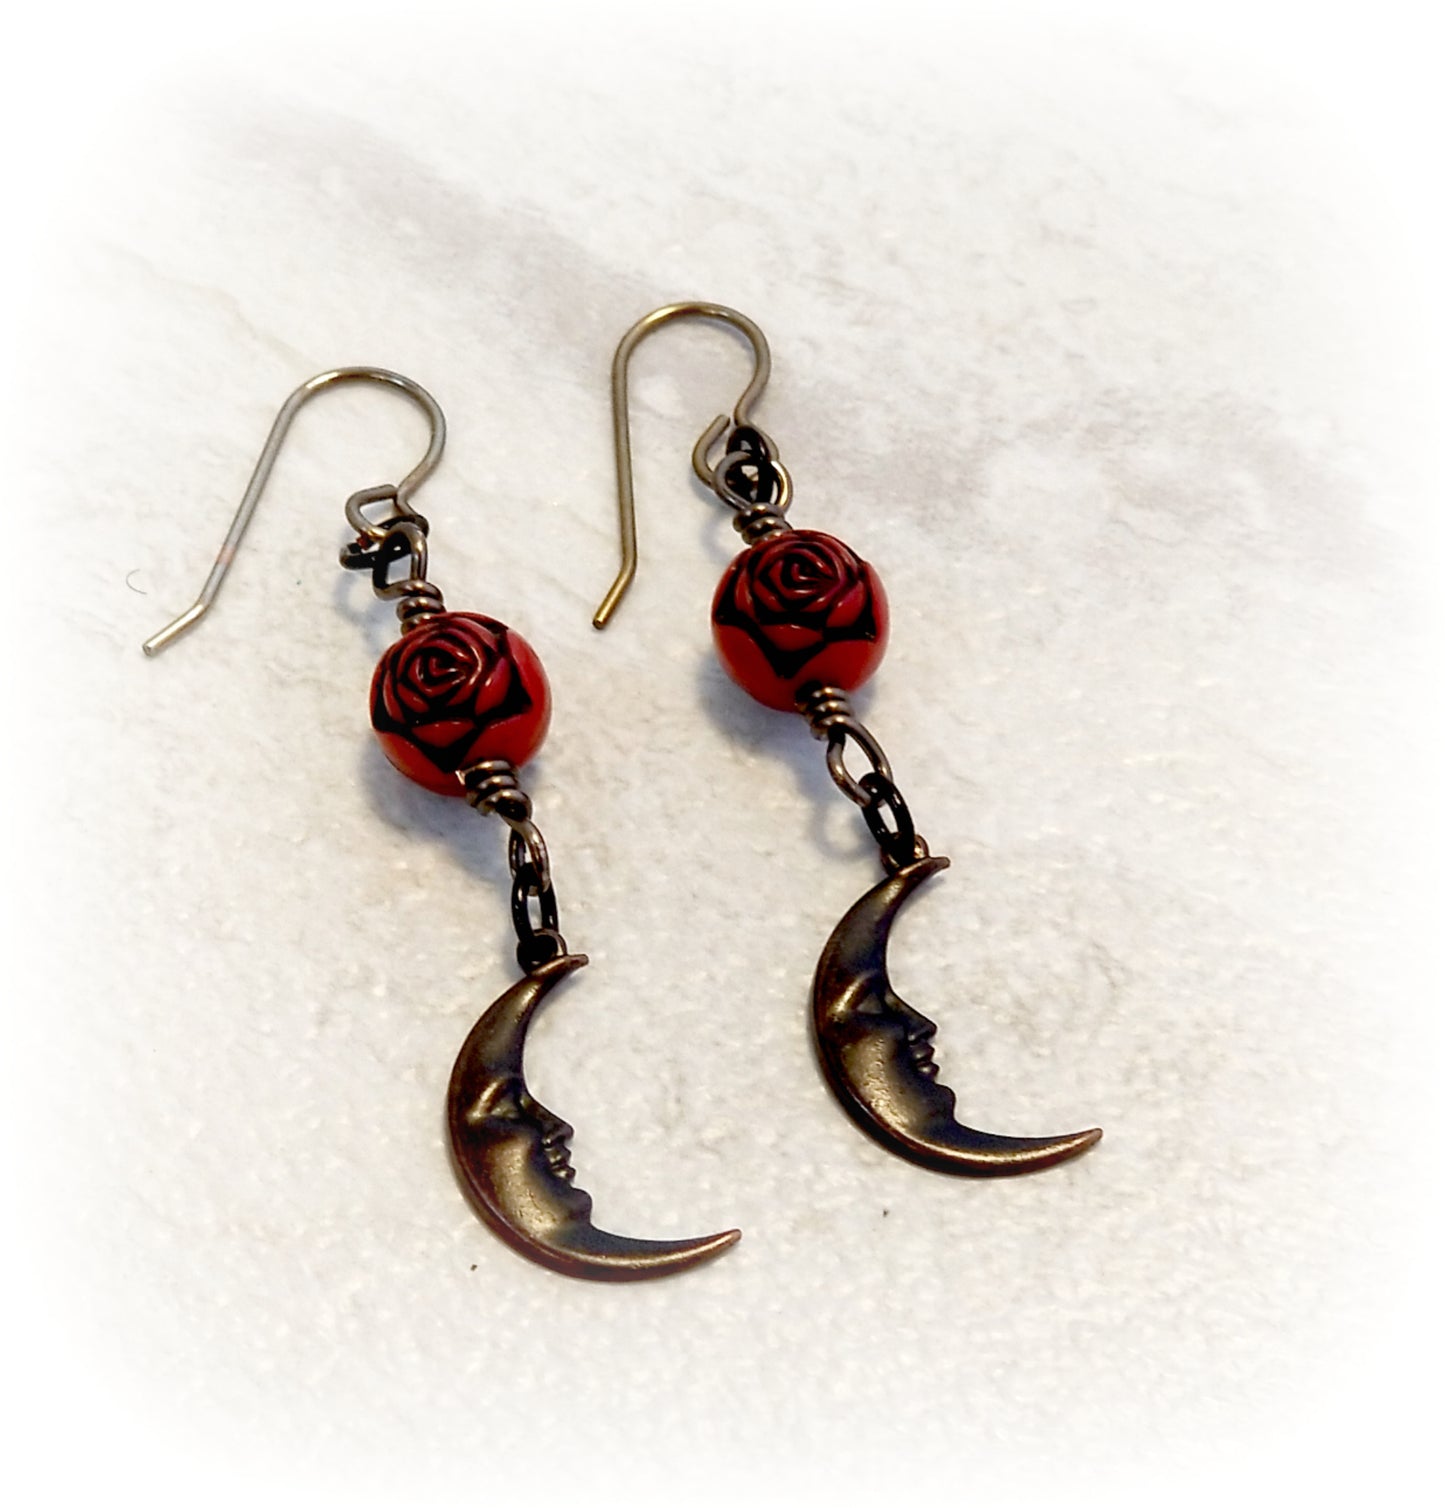 Moon Face Earrings, Crescent Moon Jewelry, Gift Idea for Her